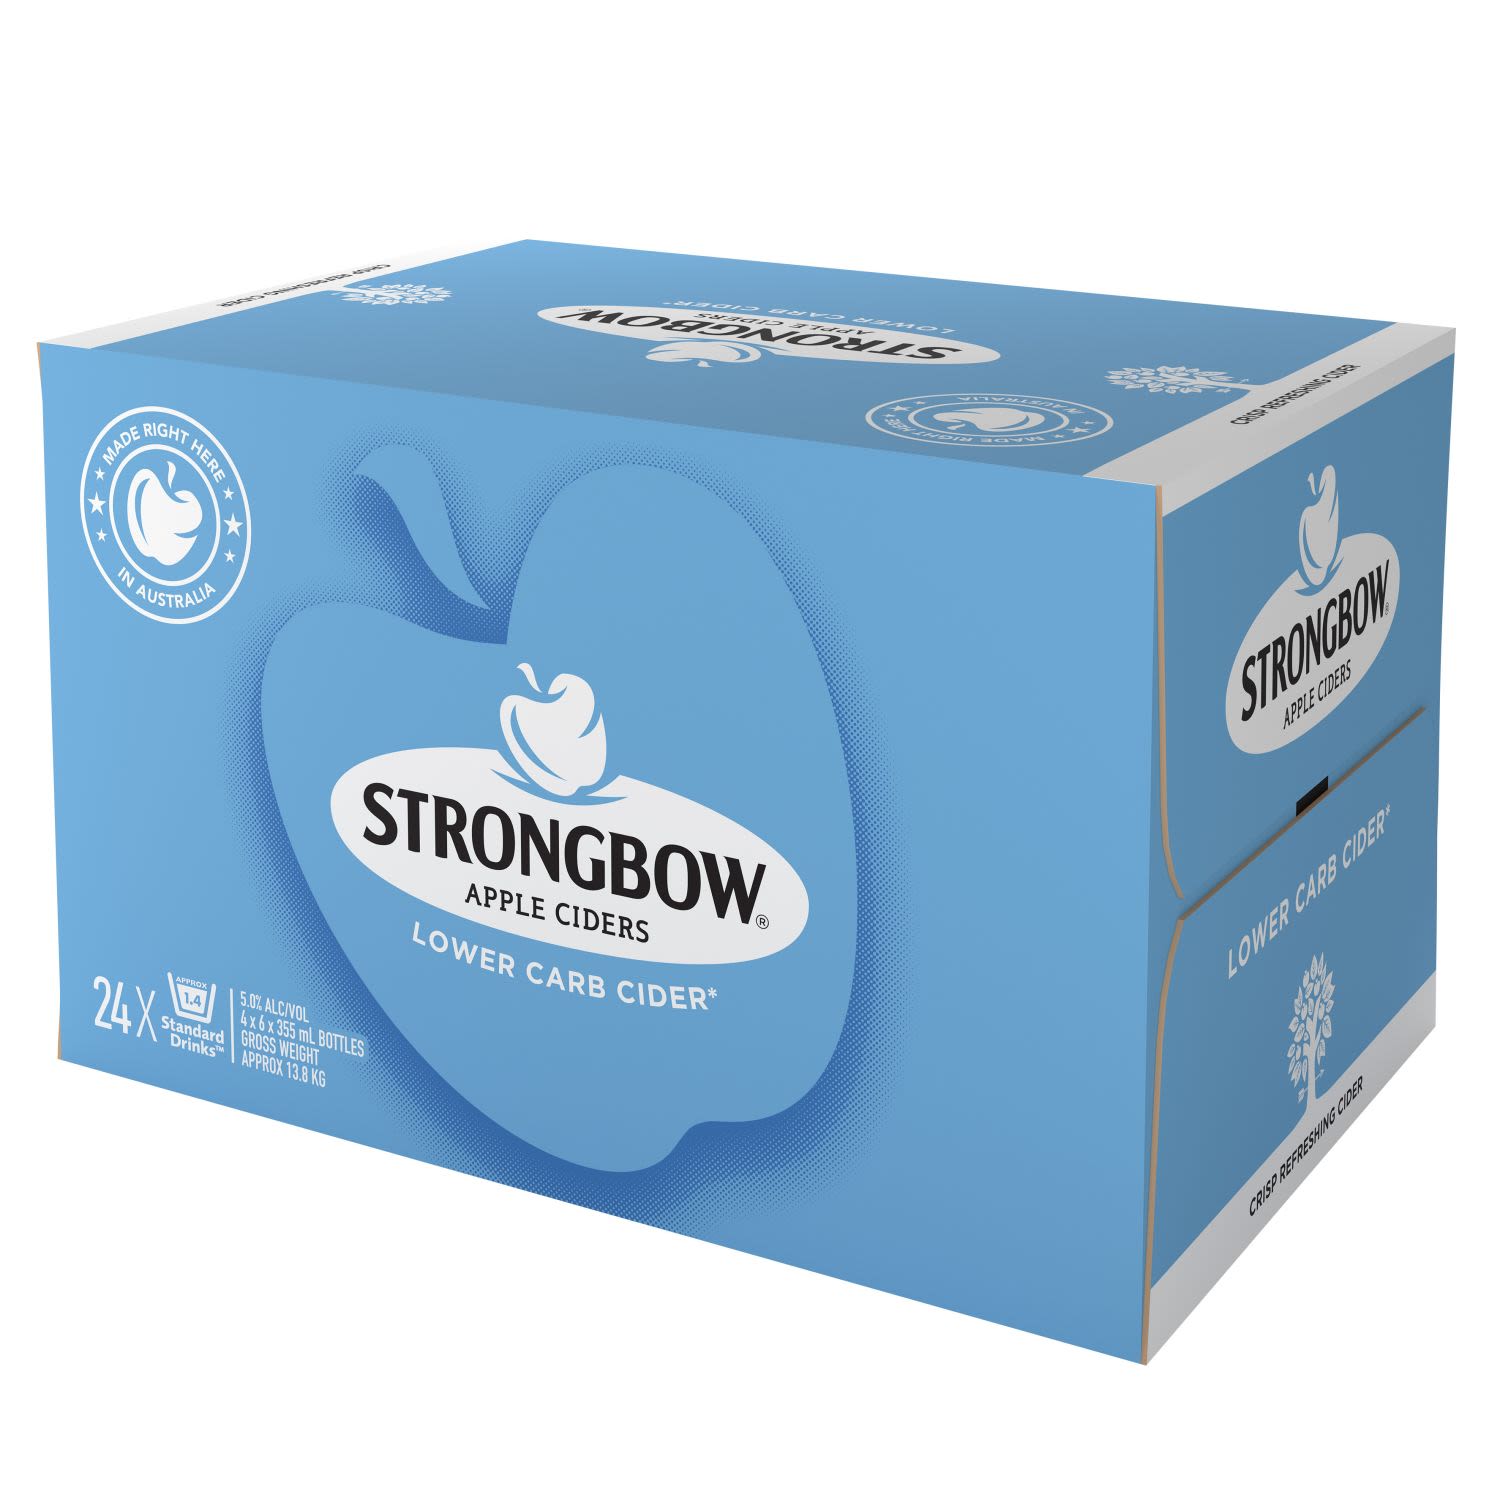 Strongbow Lower Carb Cider Bottle 355mL 24 Pack